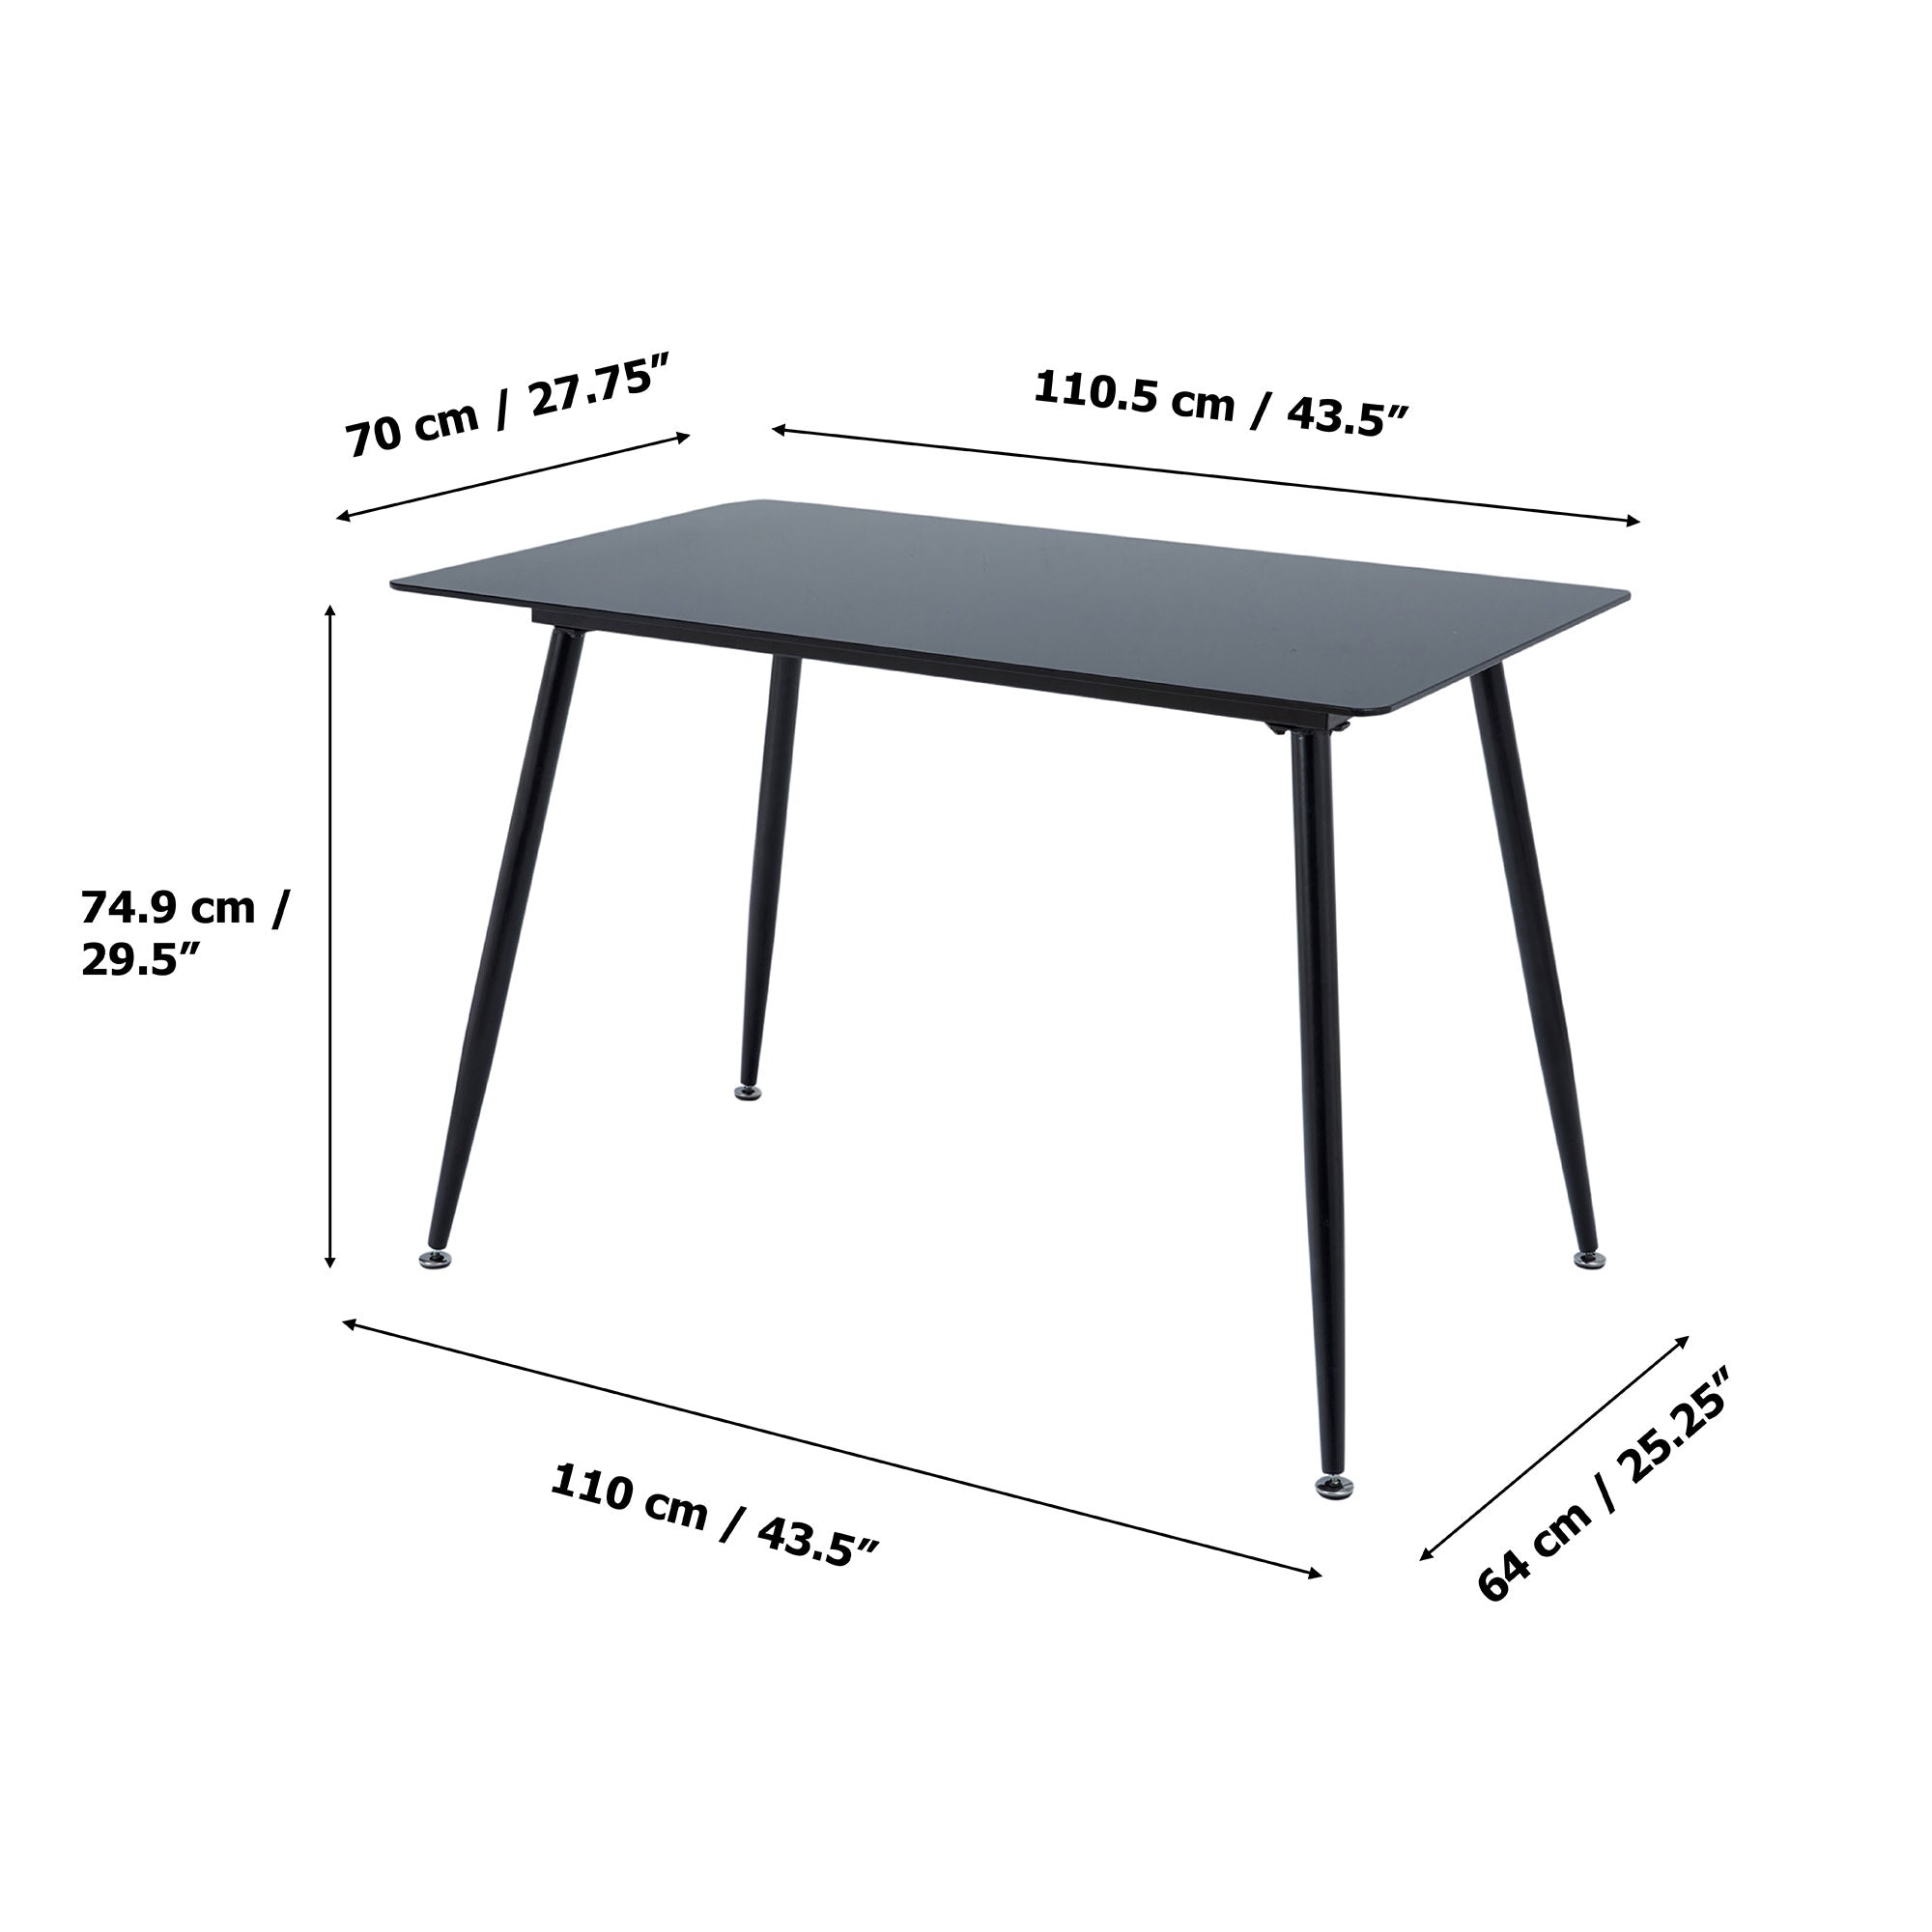 Teamson Home Julianna 43 Inch Reflective Glass Dining Table Seats Up to 4, Black